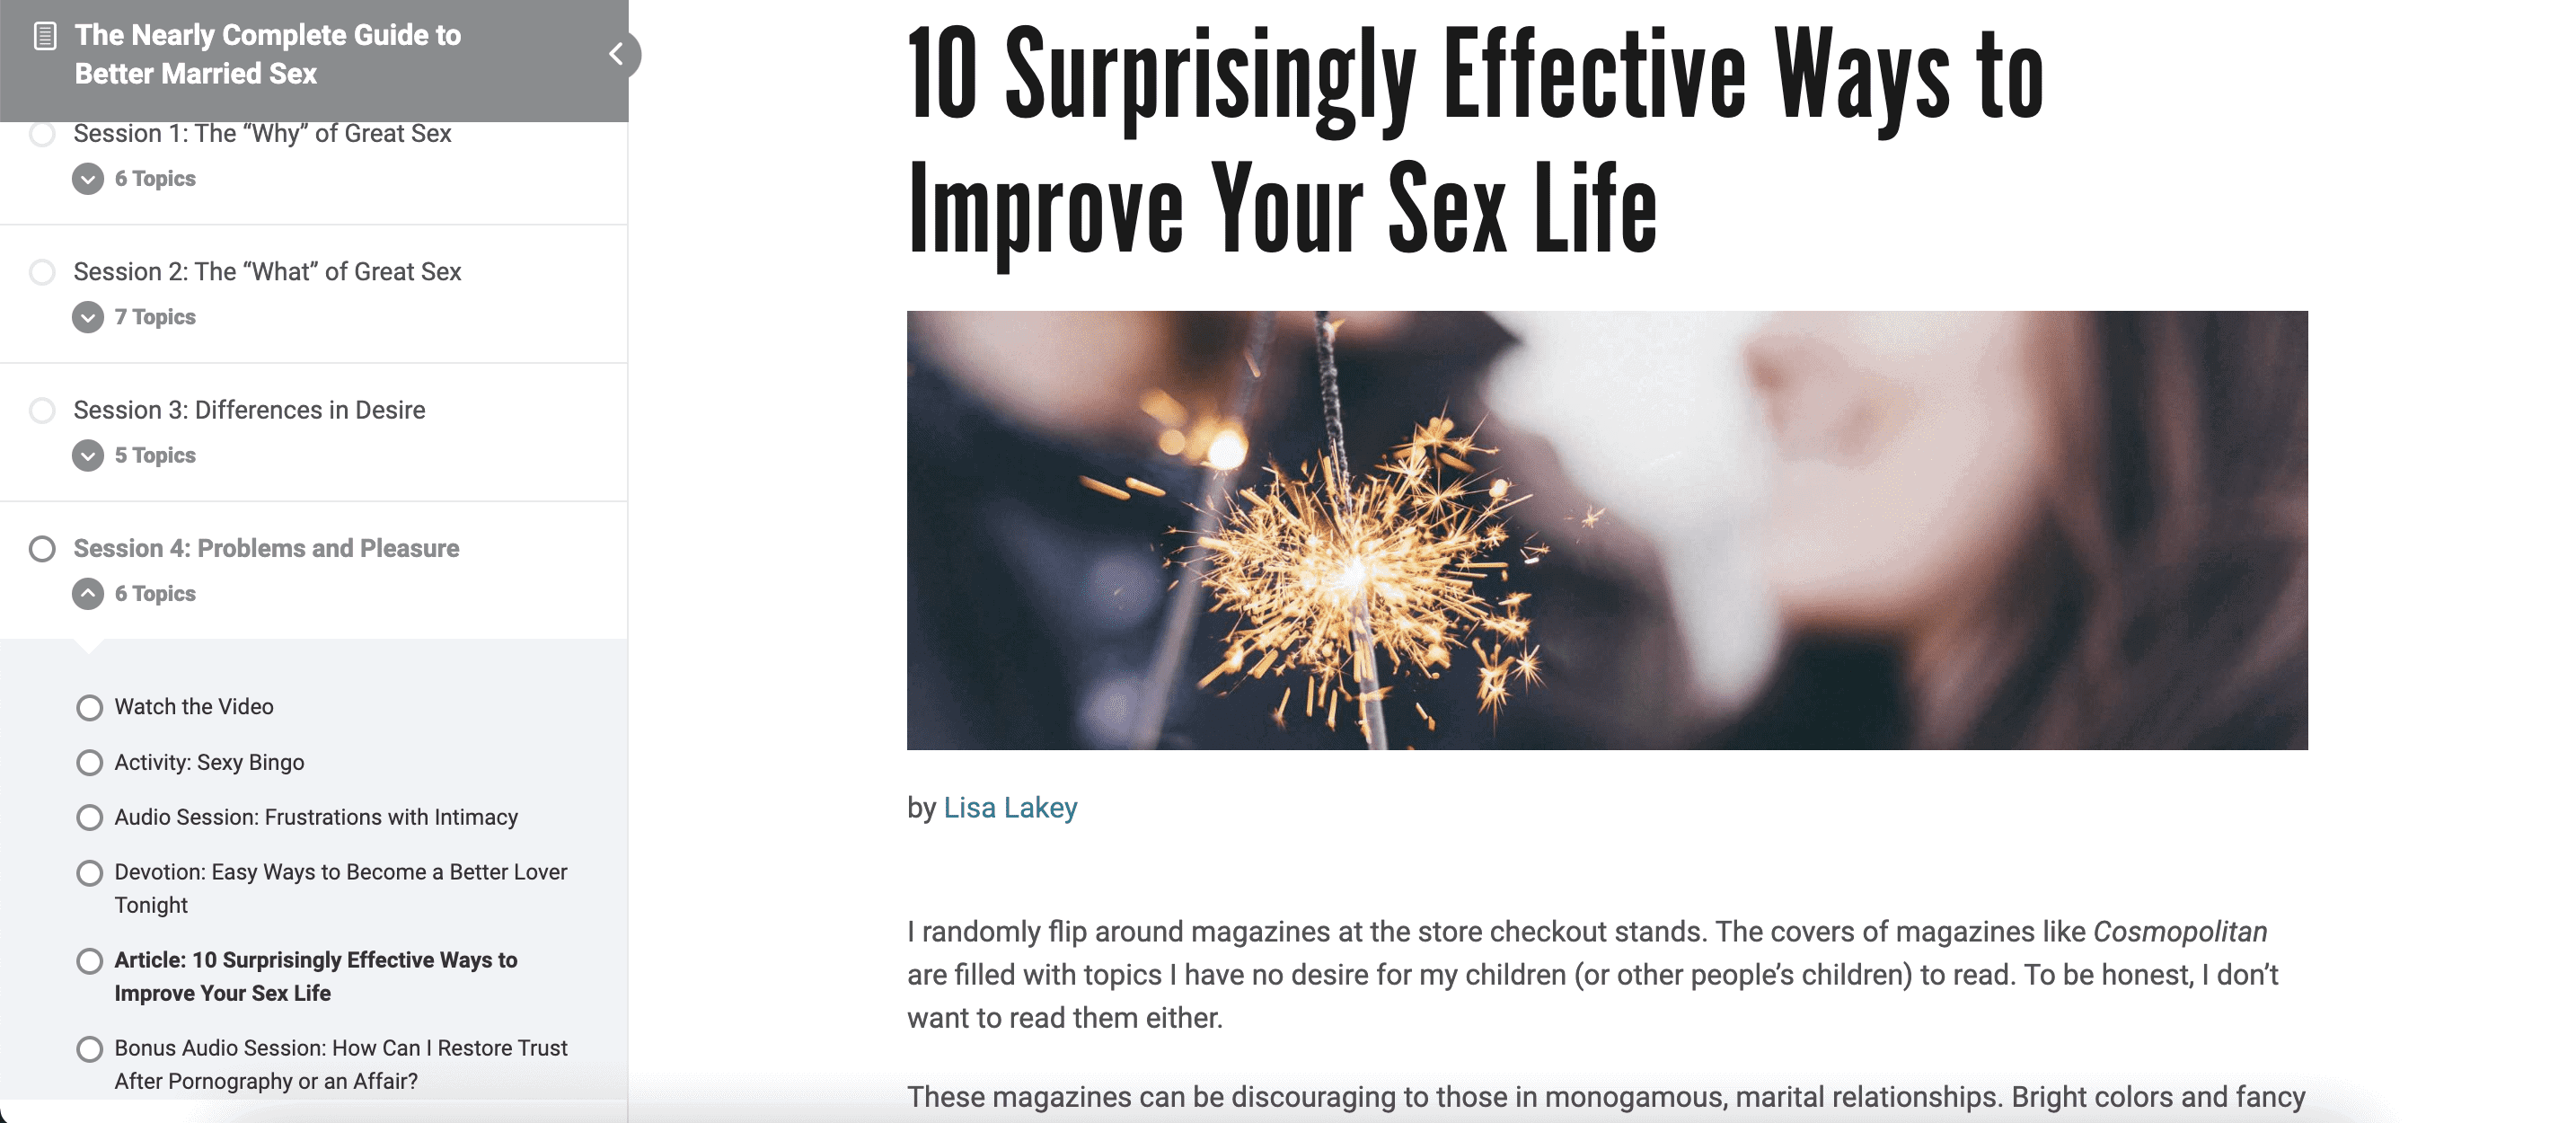 The Nearly Complete Guide to Better Married Sex Online Course